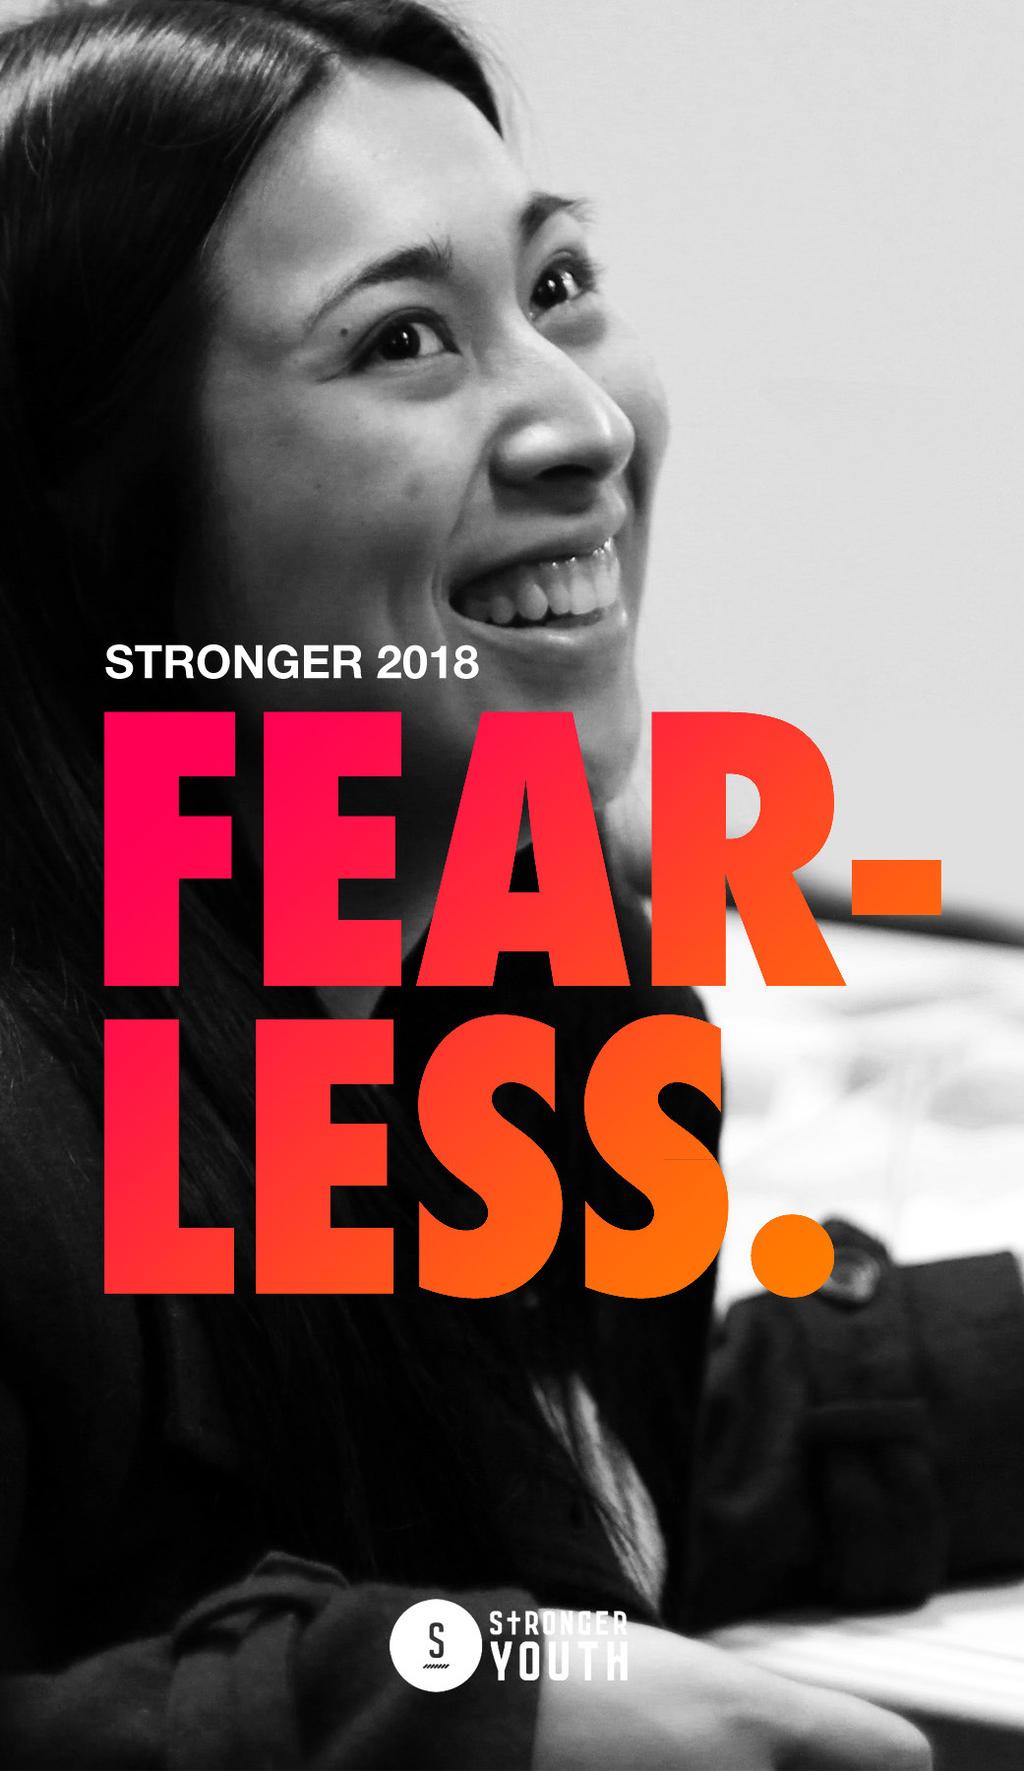 18 Stronger Youth Looking Forward The 2018 Stronger Youth Theme is Fearless coming from the letter of St Paul to the Ephesians.